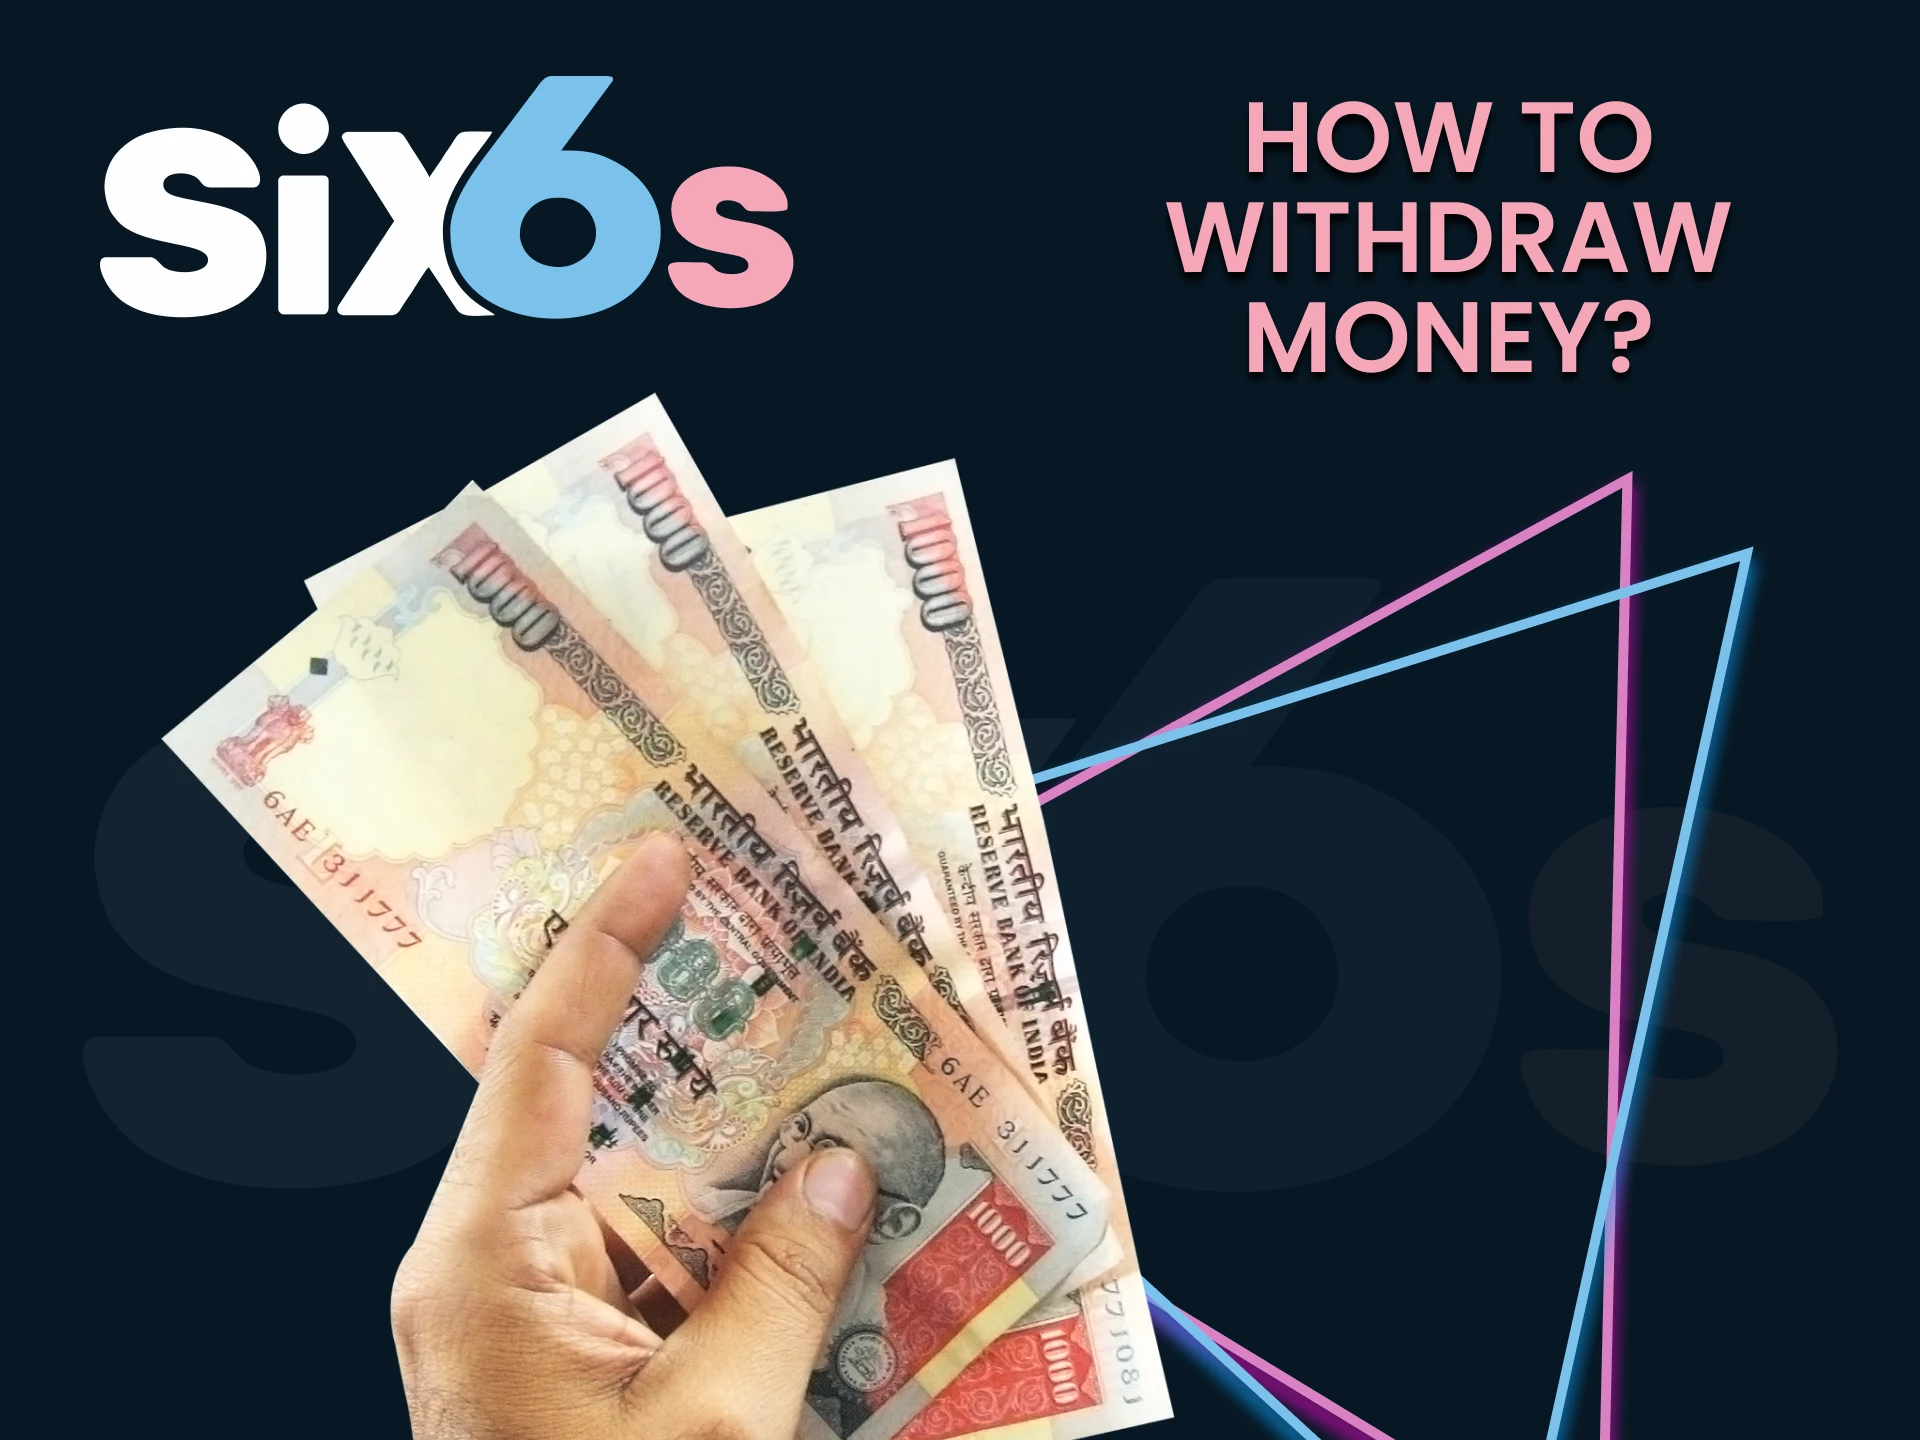 Find out how to withdraw money from Six6s bonuses.